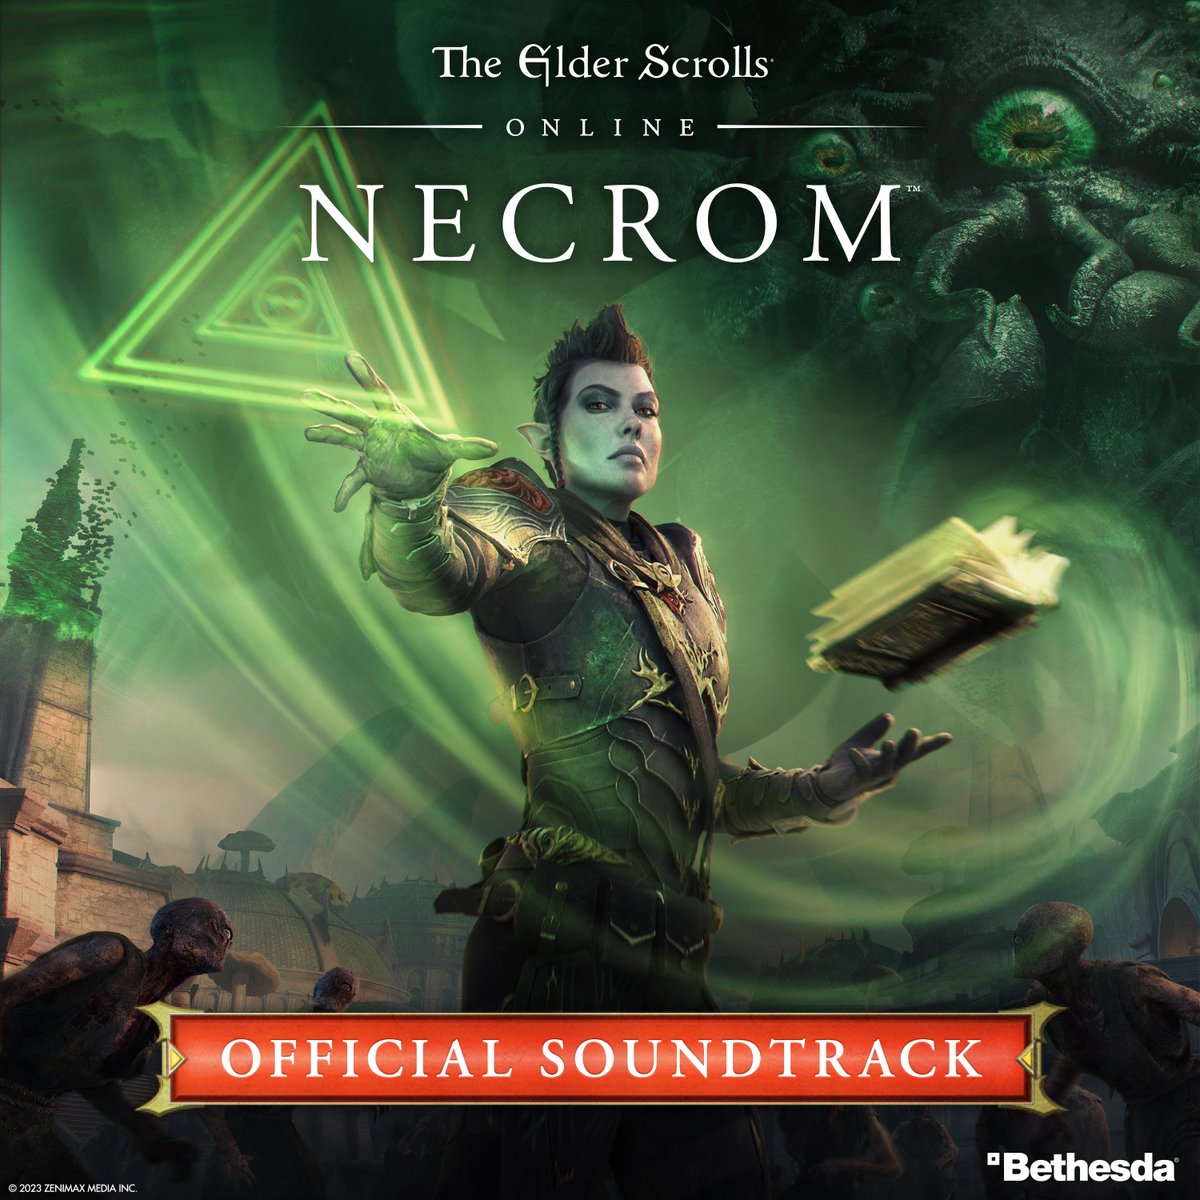 Take us back to the land of mushroom towers and silt strider calls. The Necrom Original Soundtrack is available for streaming and download today! 
❤️ @AppleMusic 
💚 @Spotify 
💙 @amazonmusic 
🔗 beth.games/44STPUJ